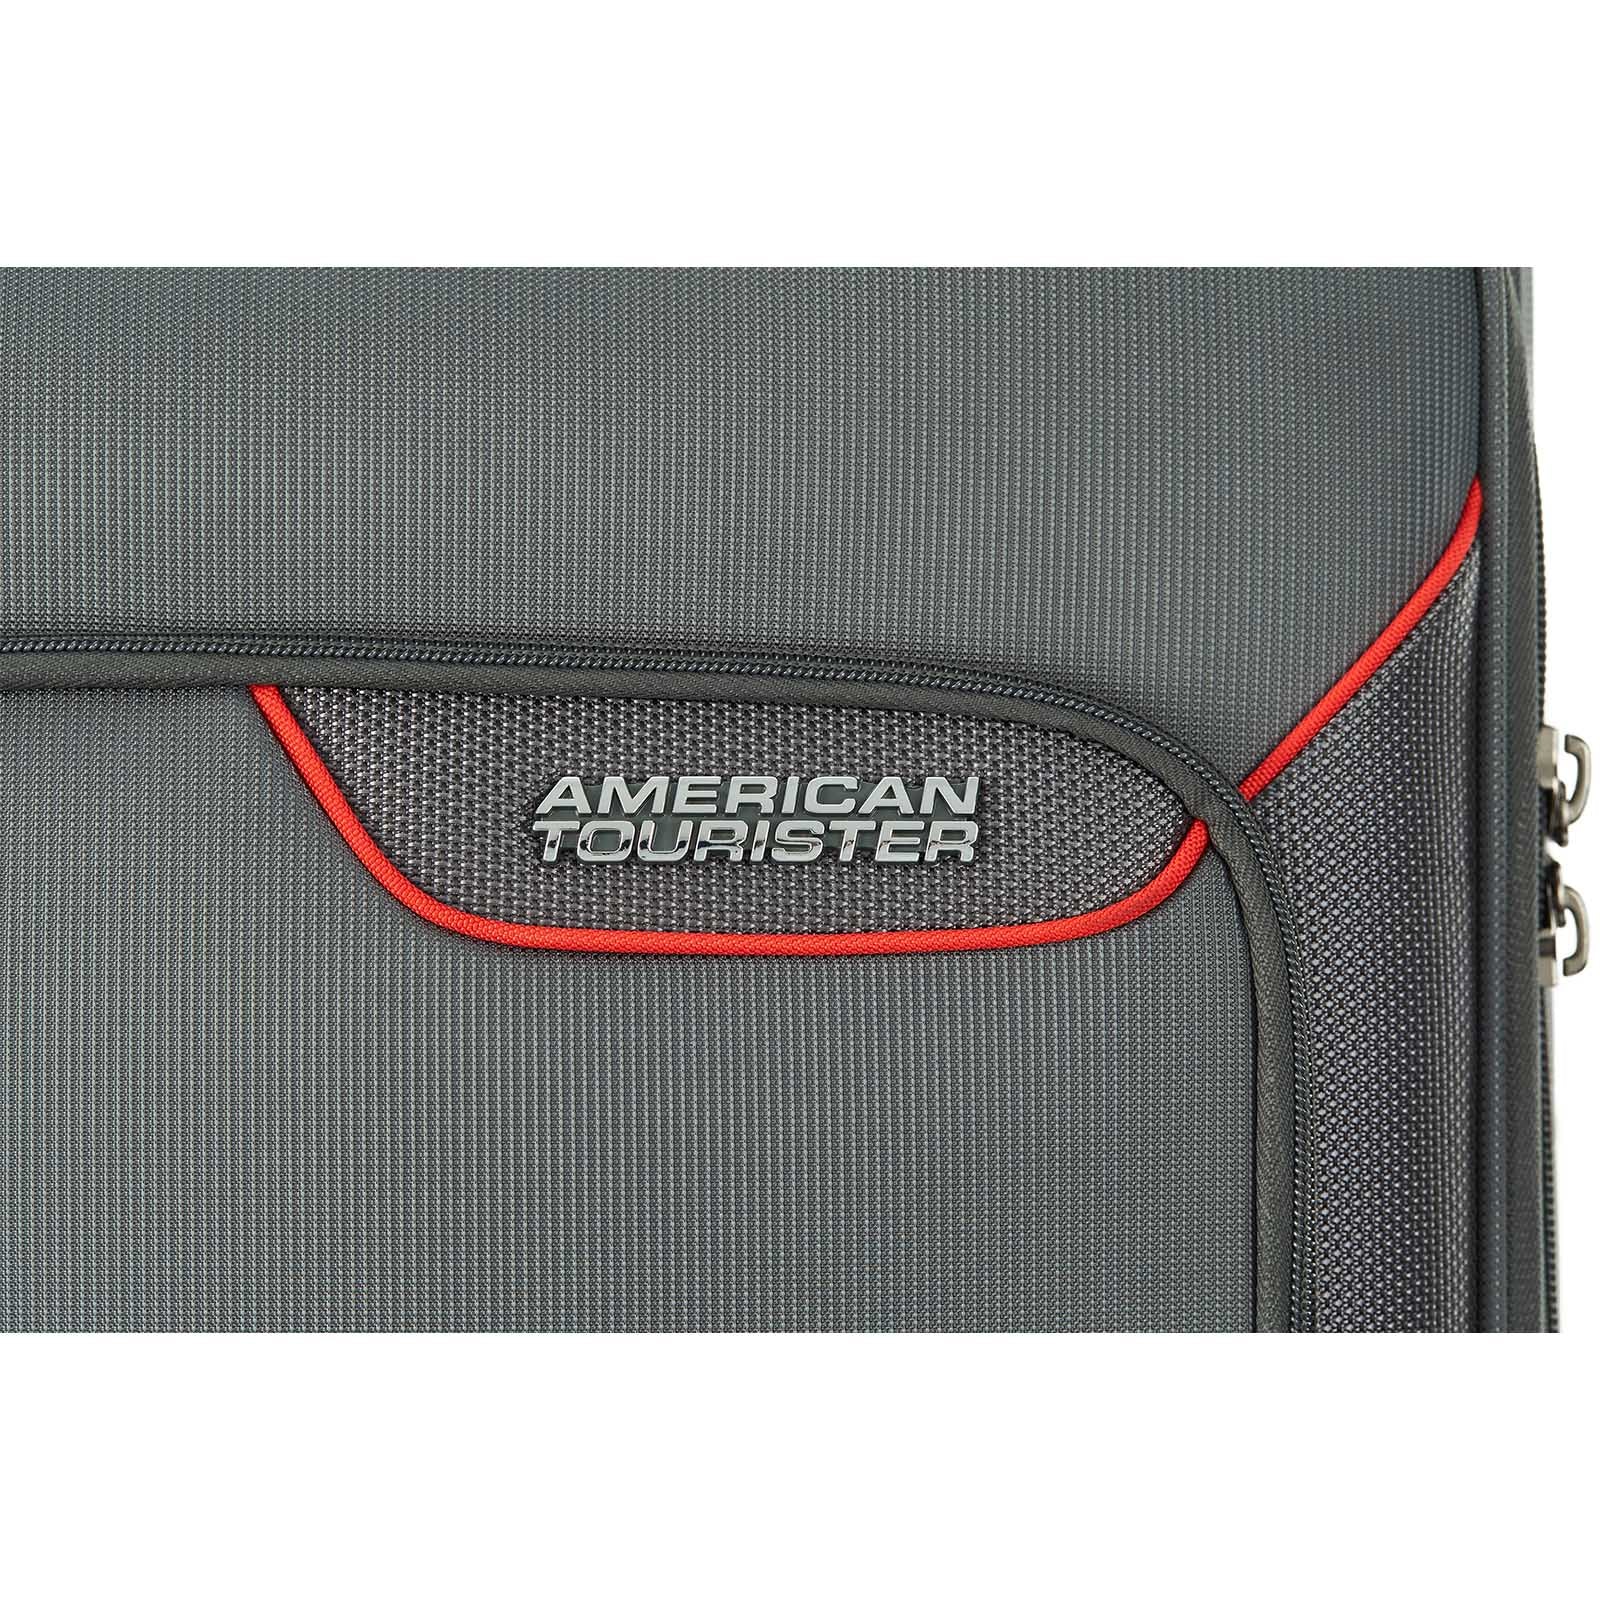 American-Tourister-Applite-4-Eco-55cm-Carry-On-Suitcase-Grey-Red-Logo